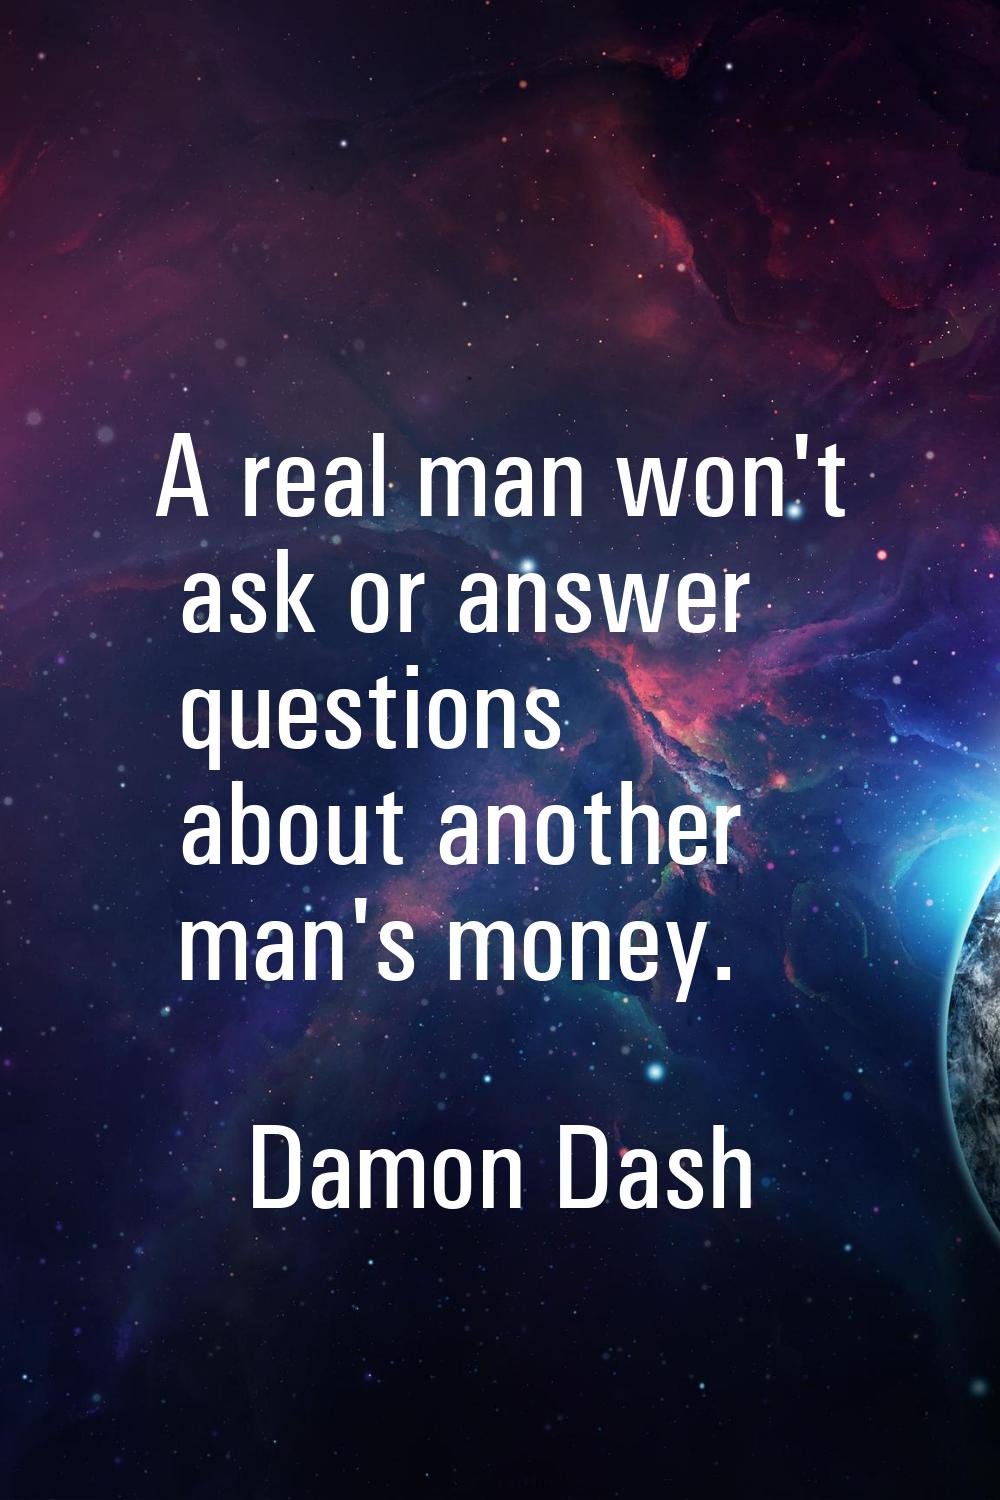 A real man won't ask or answer questions about another man's money.